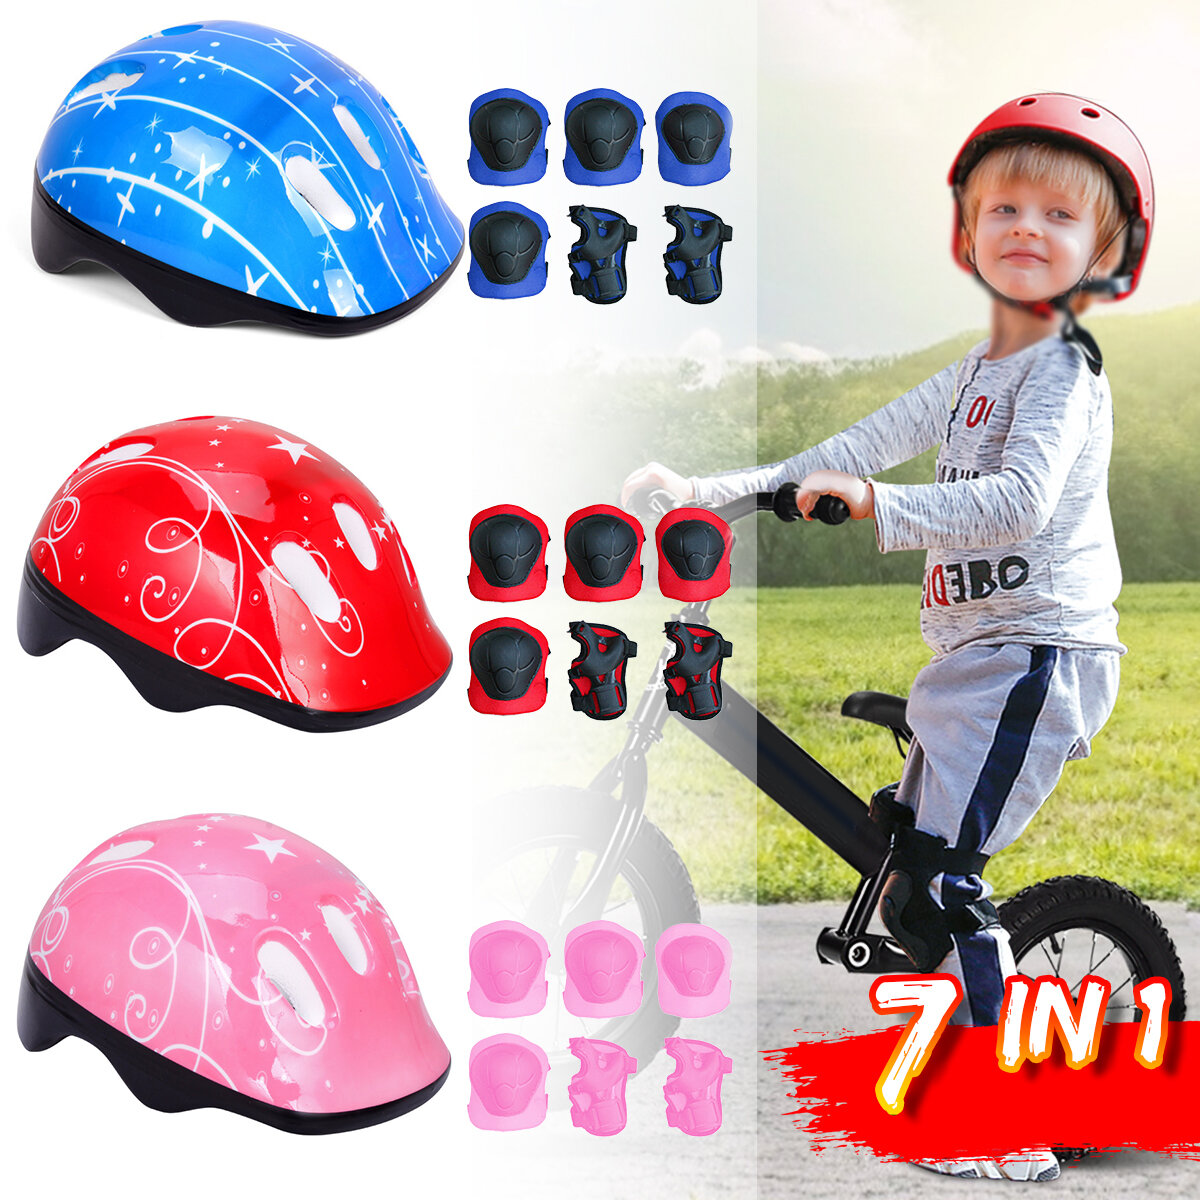 7 IN 1 Kids's Balance Bike Helmet Kits With Protect Knee Wrist Elbow Pads Roller Skating Protective Equipment For Toddle